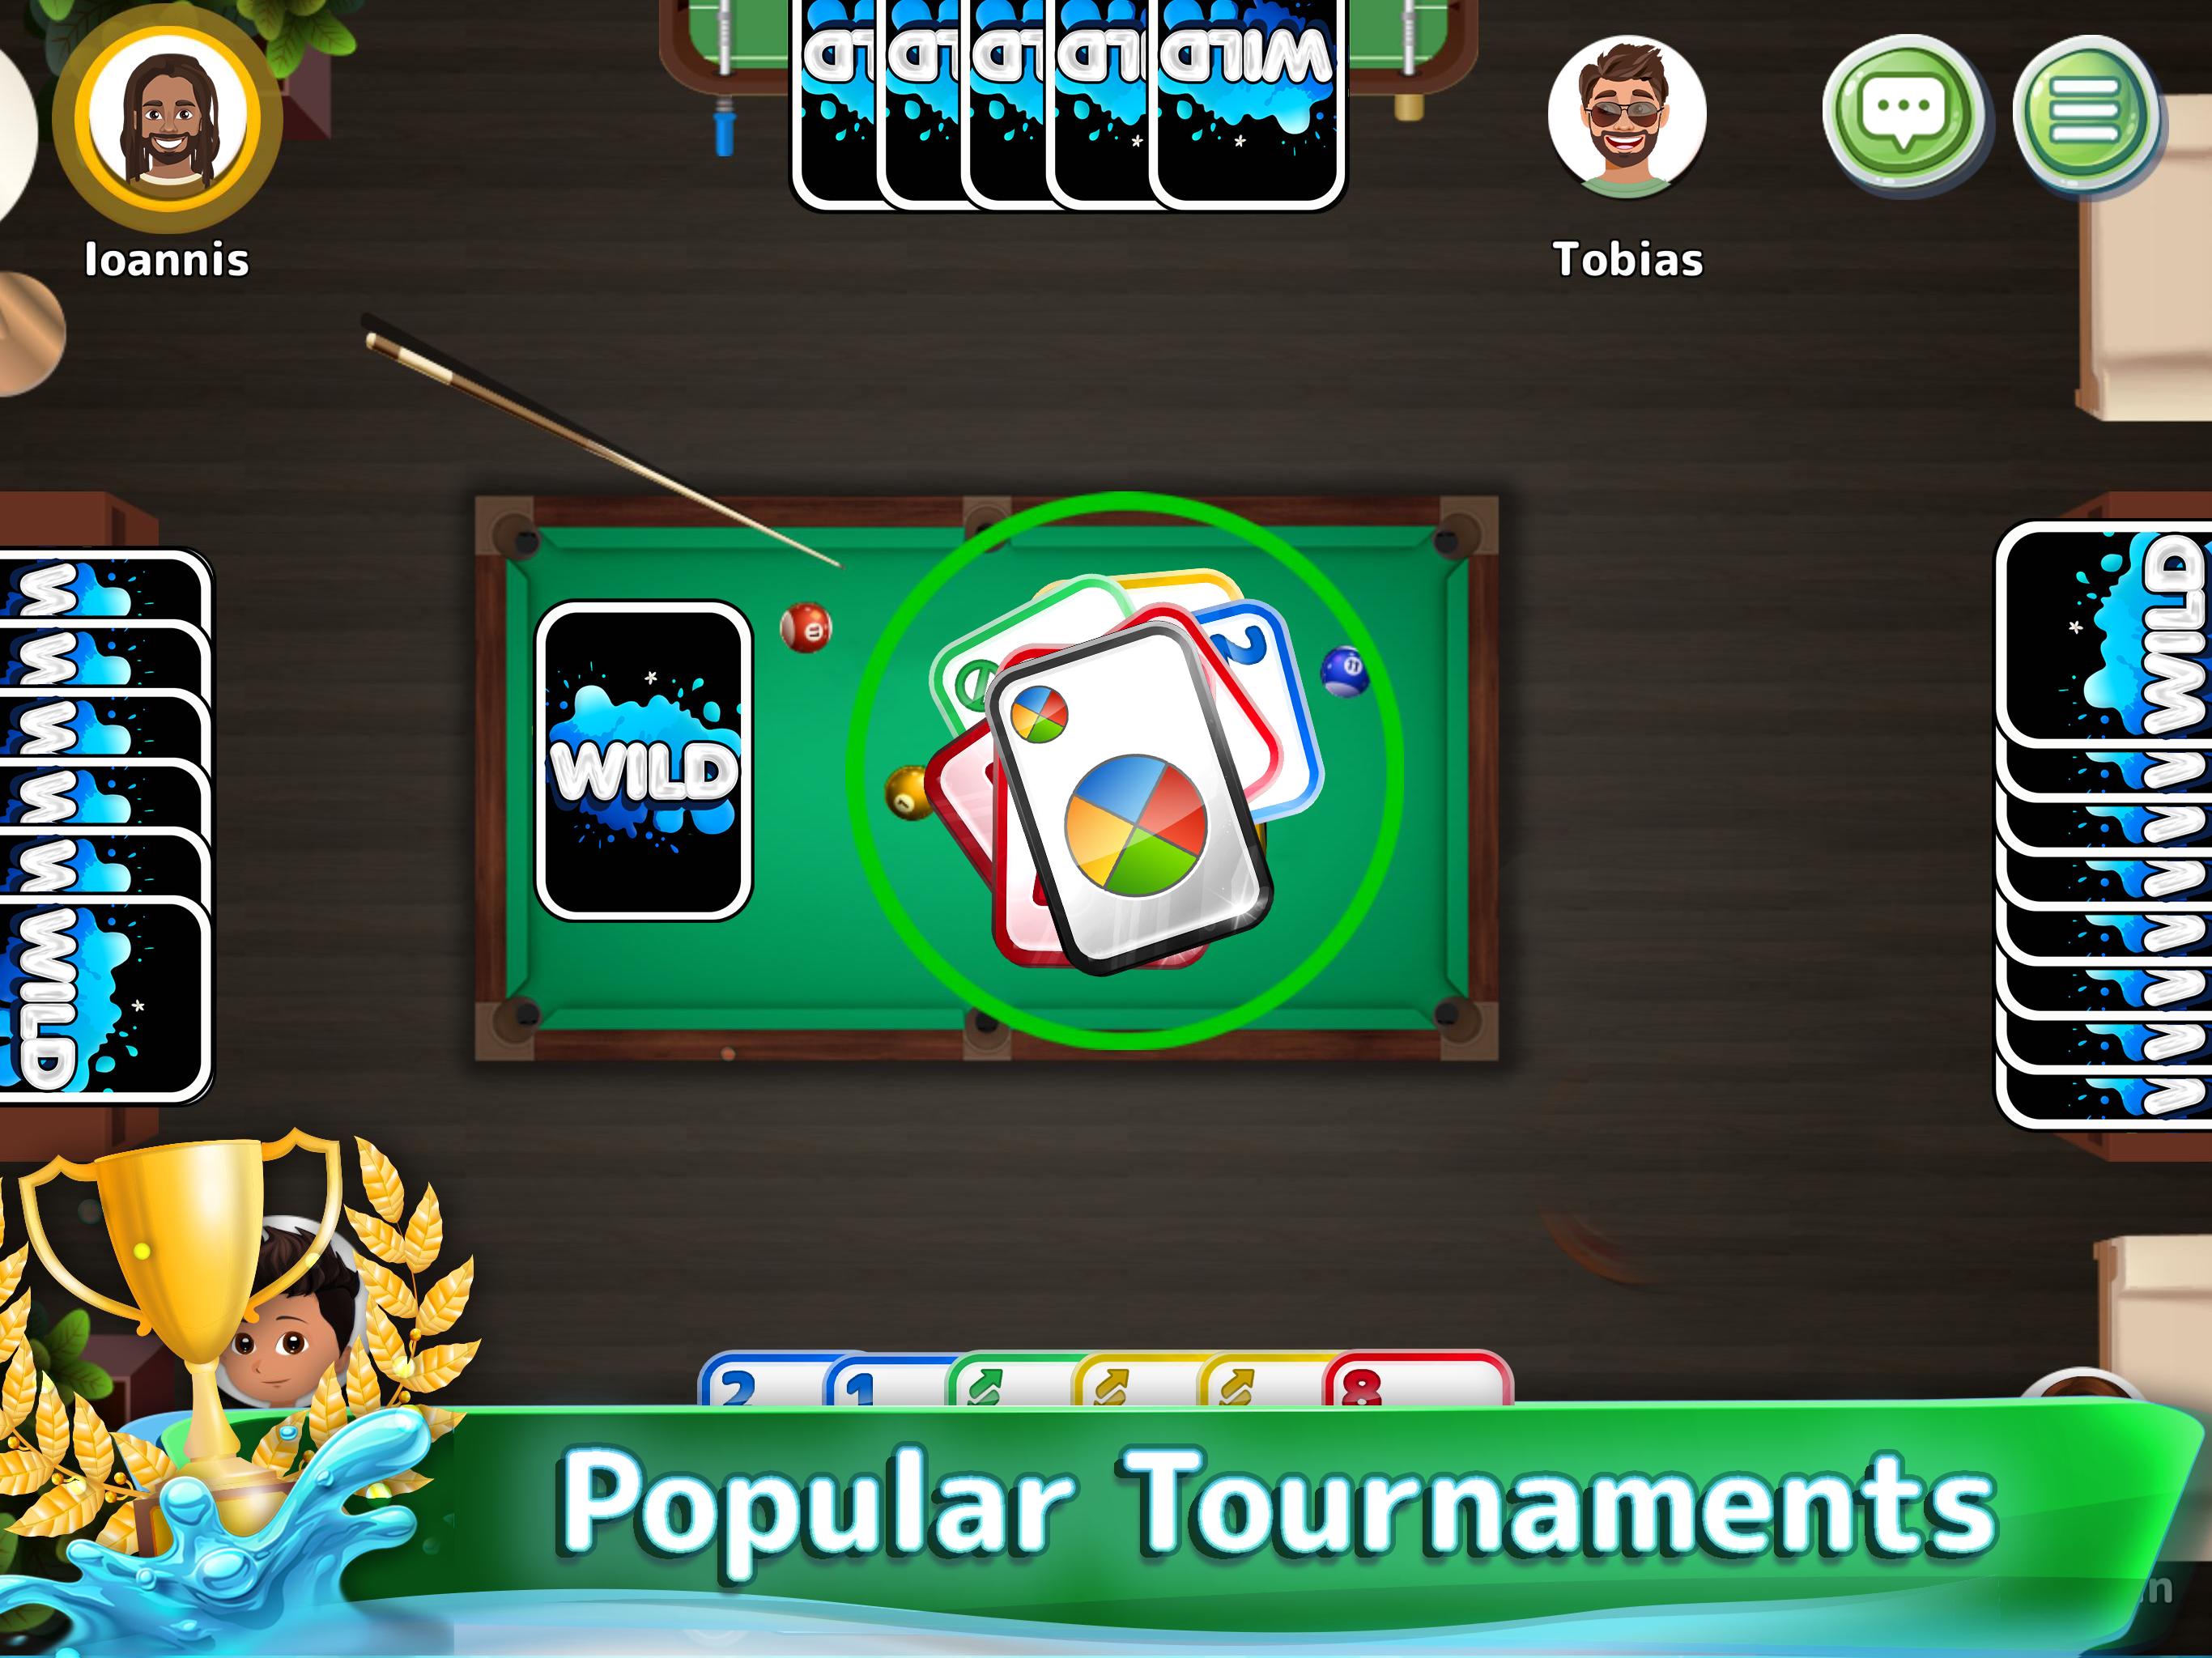 WILD CARDS Online: Multiplayer Games with Friends 3.0.22 Screenshot 18